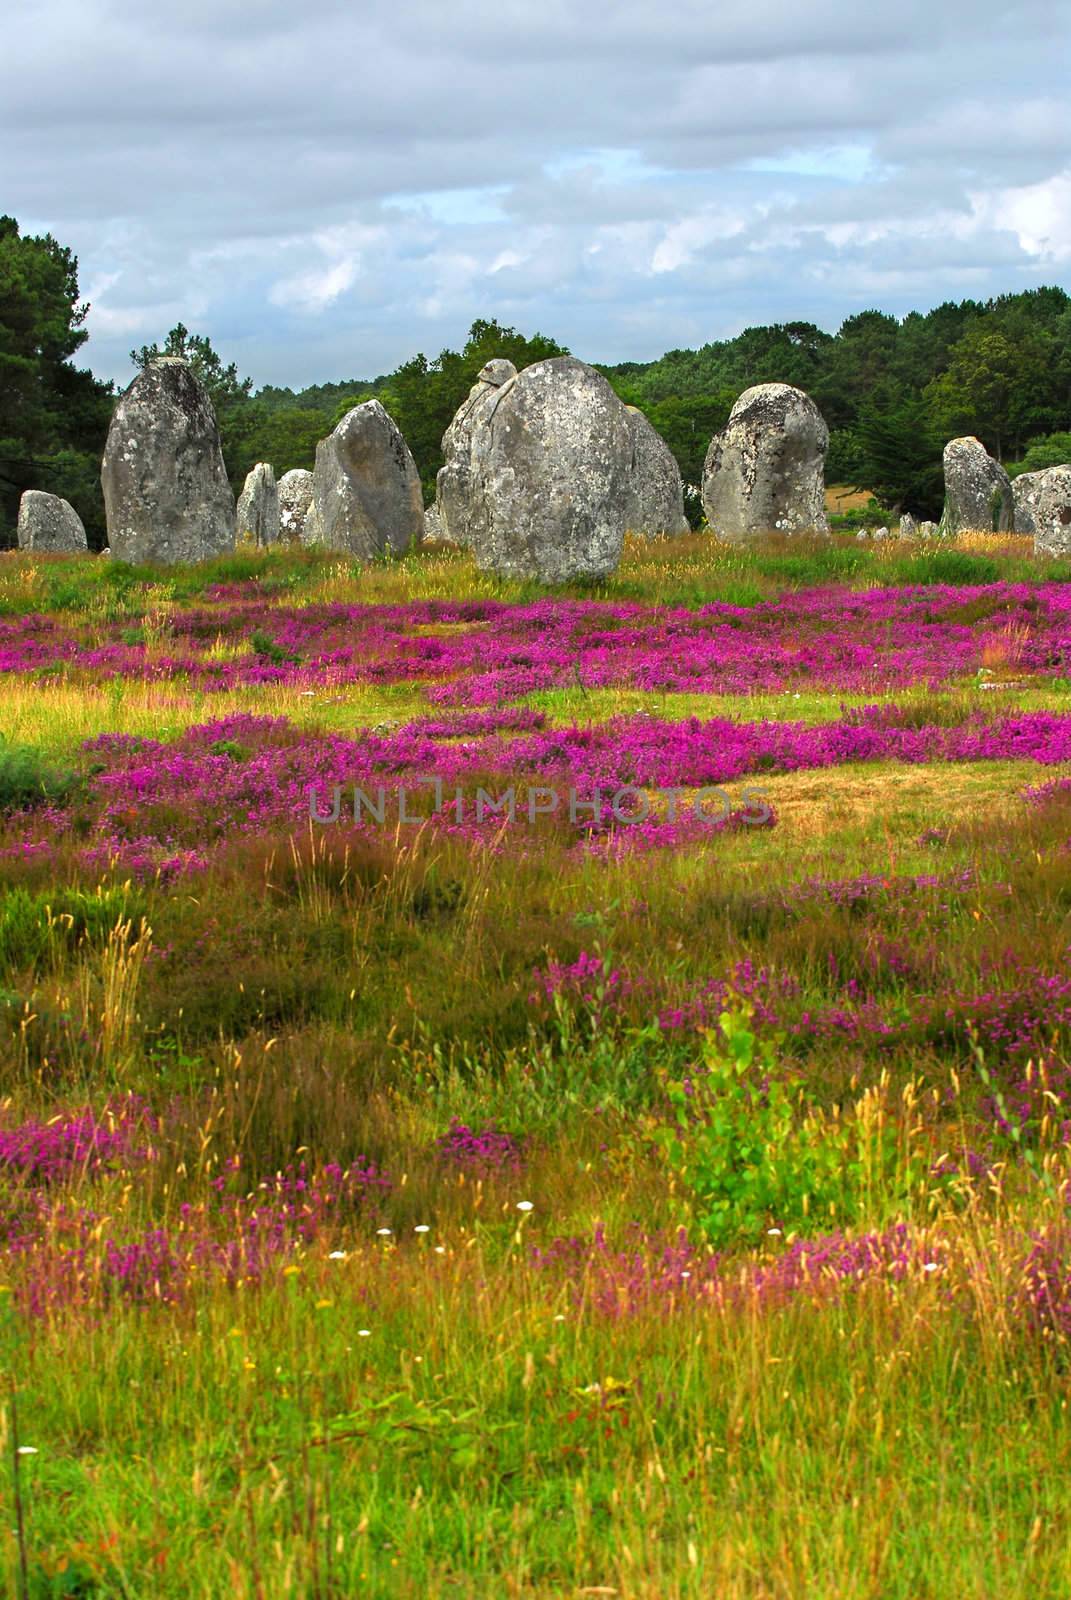 Heather blooming among prehistoric megalithic monuments menhirs in Carnac area in Brittany, France